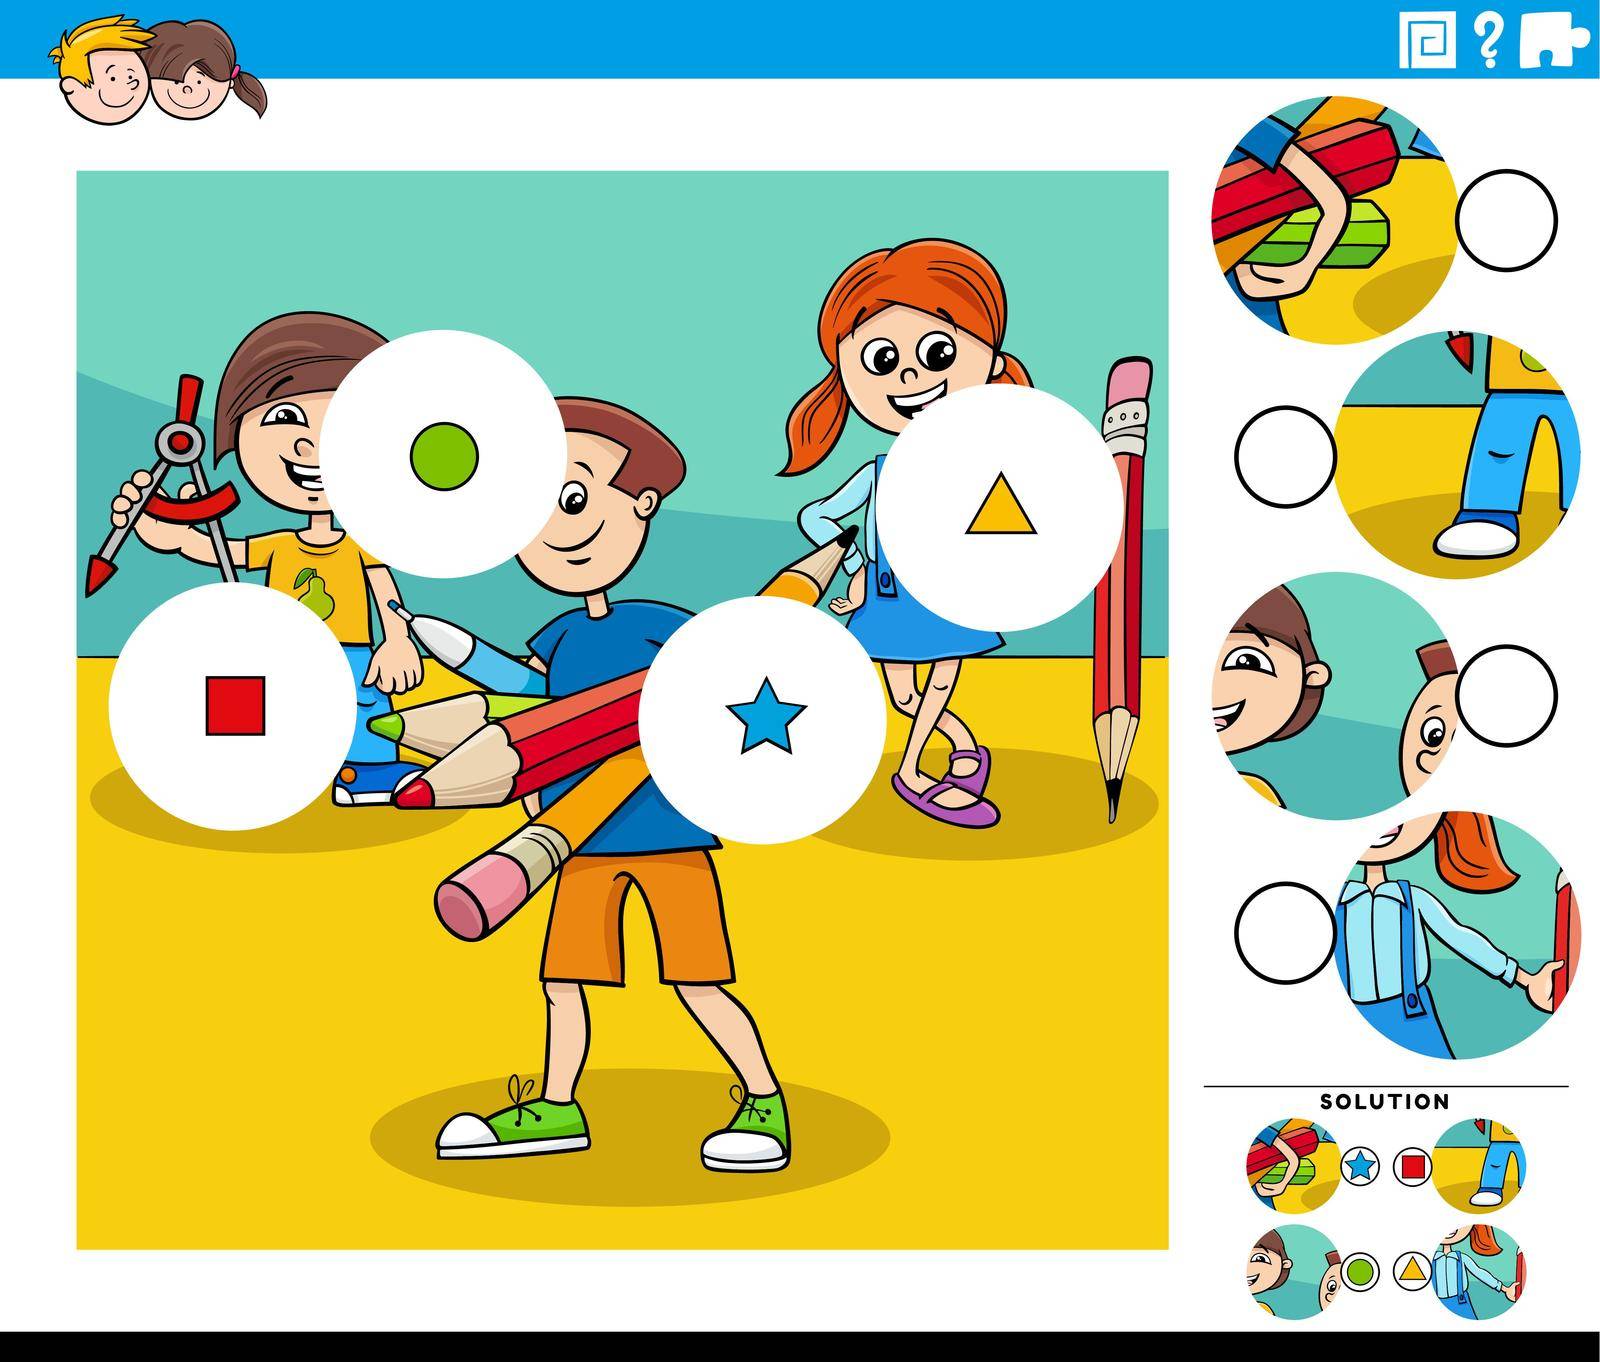 match pieces game with cartoon pupils characters by izakowski